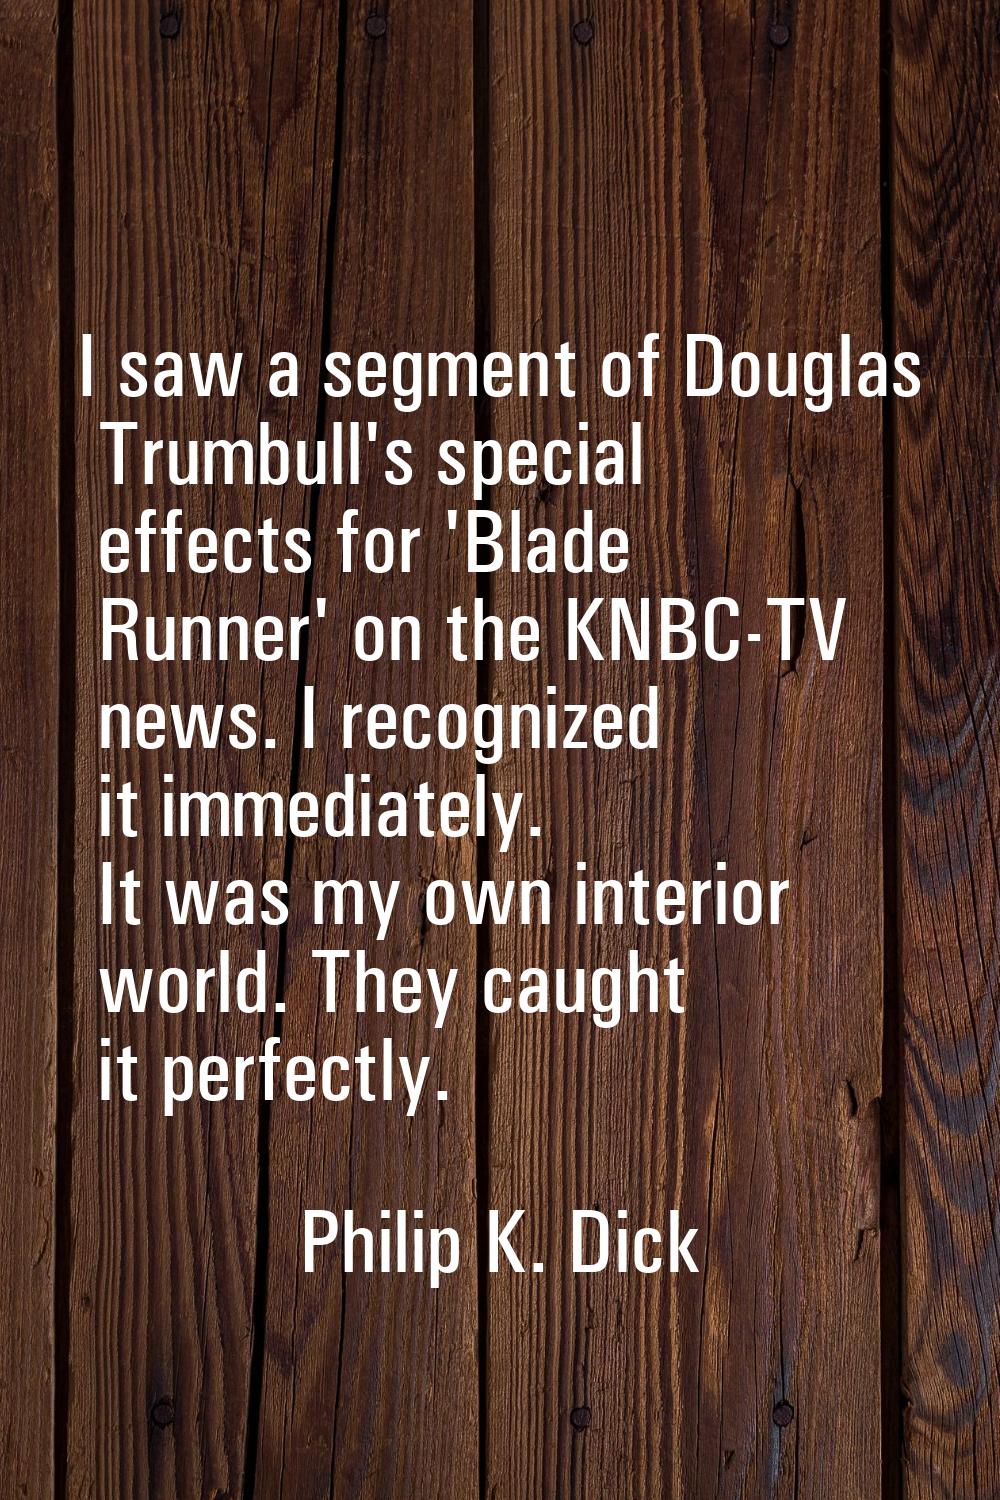 I saw a segment of Douglas Trumbull's special effects for 'Blade Runner' on the KNBC-TV news. I rec